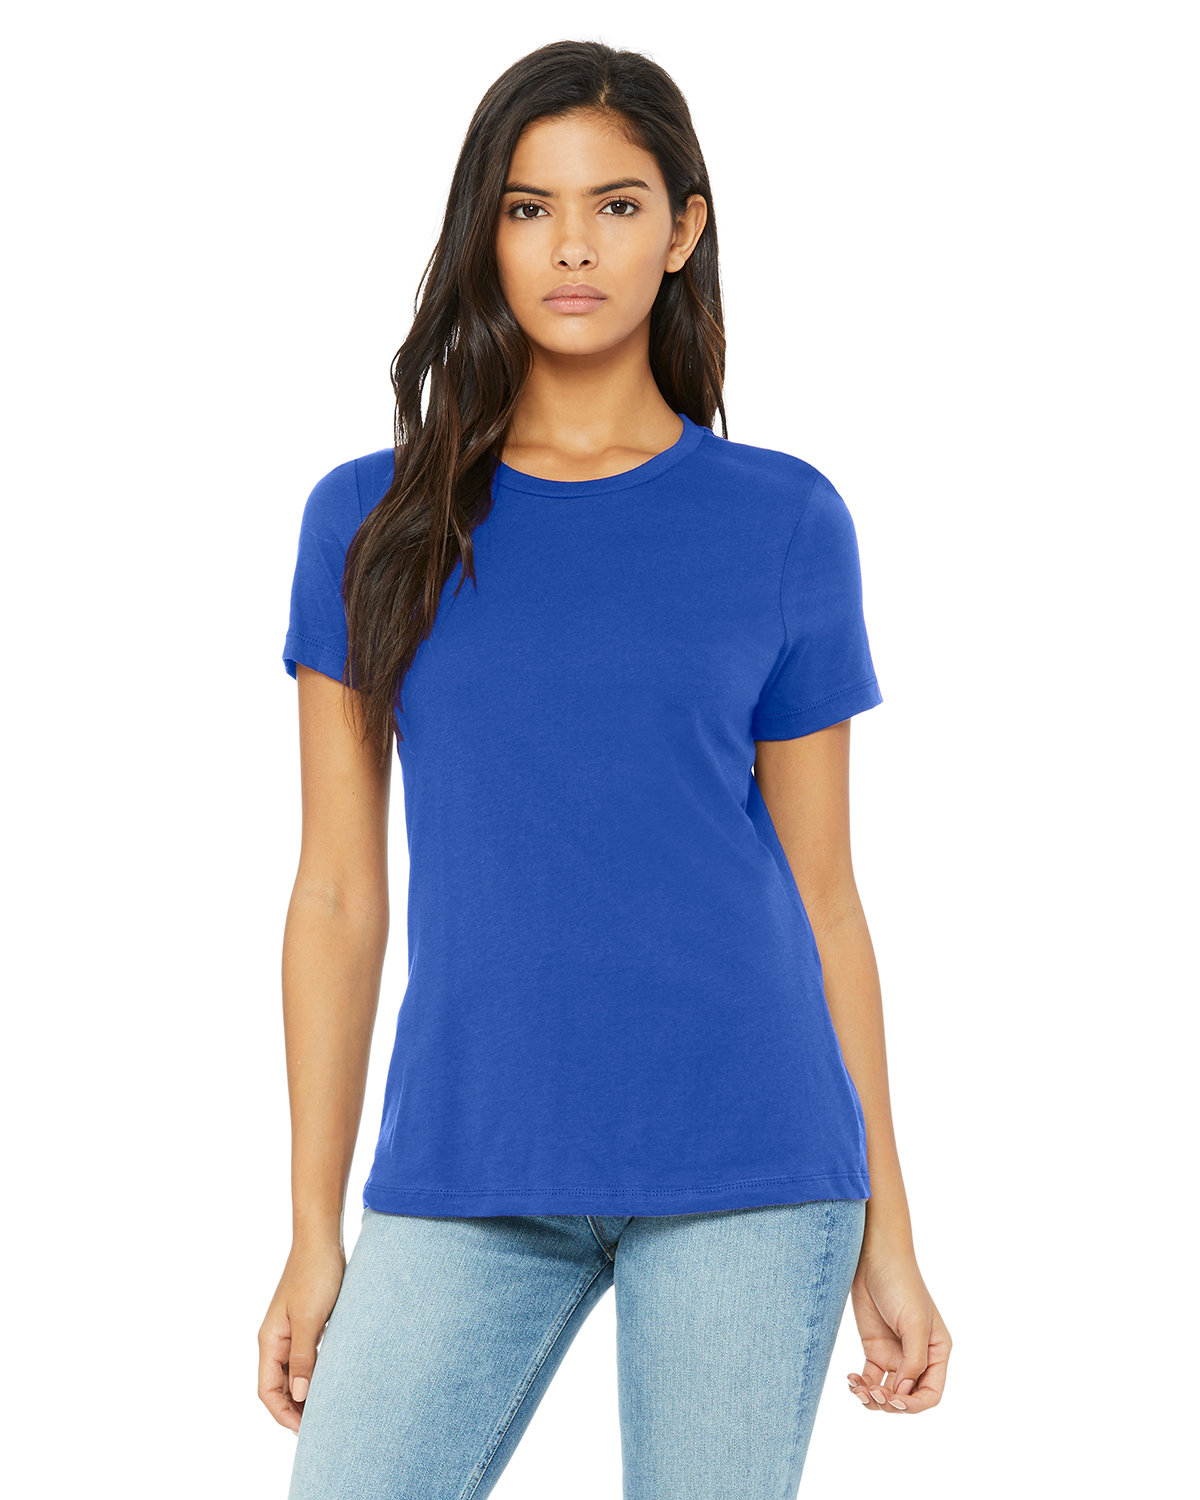 Short Sleeve Classic Fit T-Shirt in Blue FWRD Women Clothing T-shirts Short Sleeved T-Shirts 